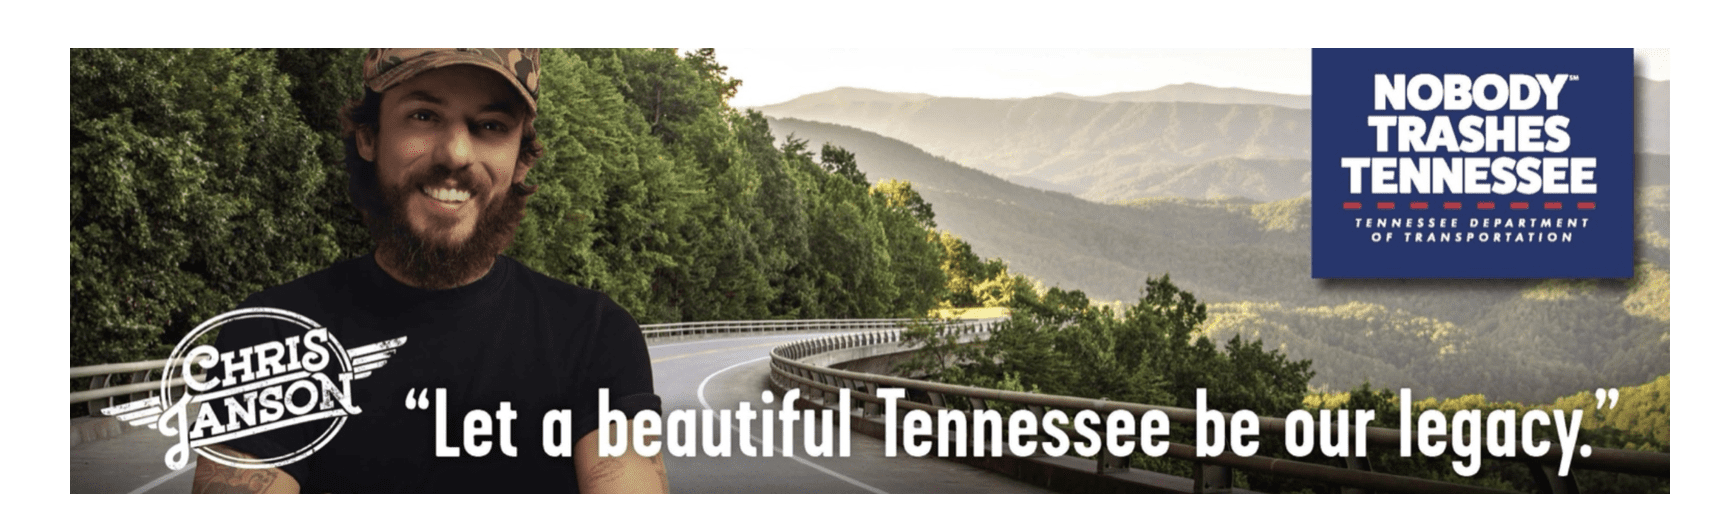 Multi-Platinum Country Music Star Chris Janson Teams Up with Nobody Trashes Tennessee.